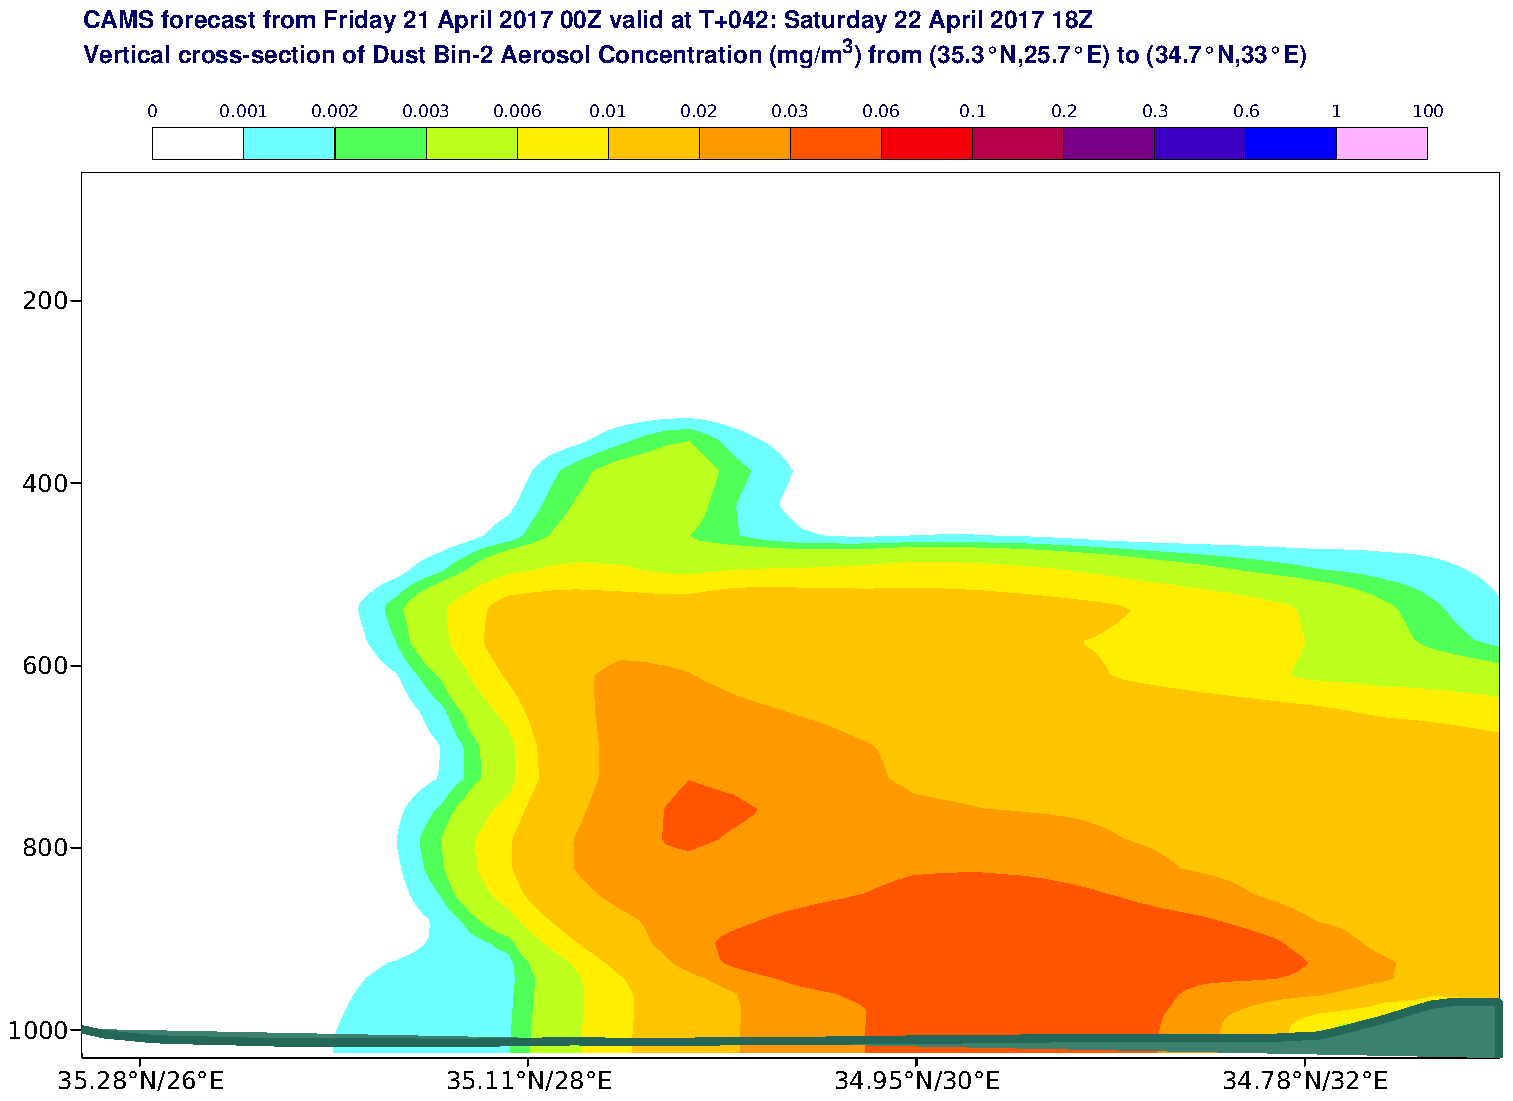 Vertical cross-section of Dust Bin-2 Aerosol Concentration (mg/m3) valid at T42 - 2017-04-22 18:00